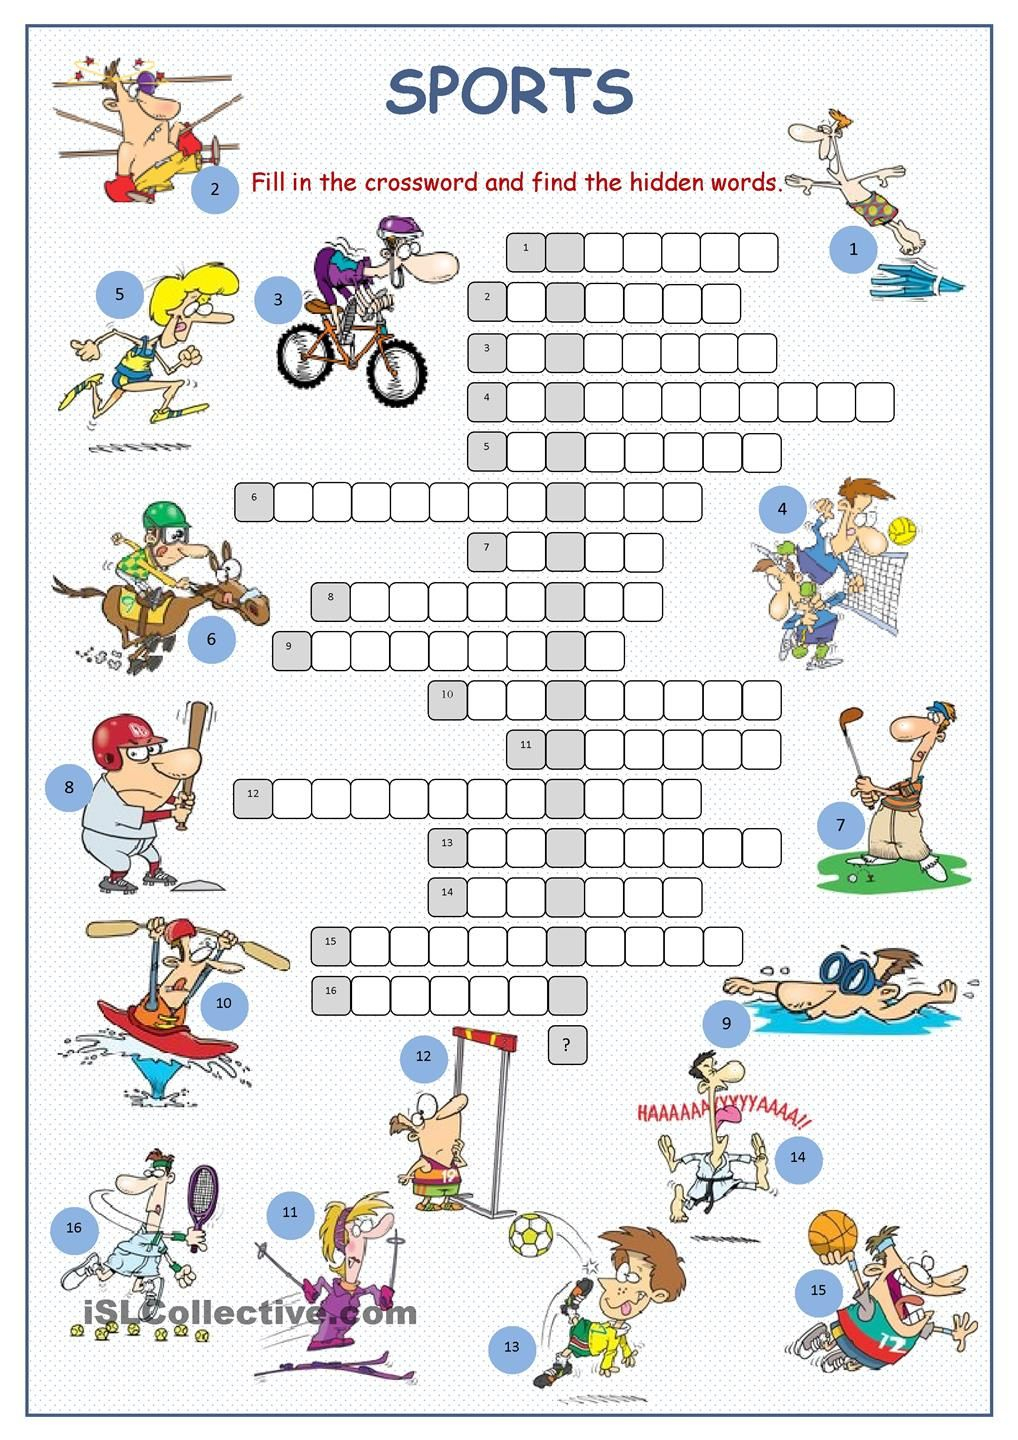 Sports Crossword Puzzle | English | Sports Crossword, Sport English - Printable Sports Crossword Puzzles With Answers